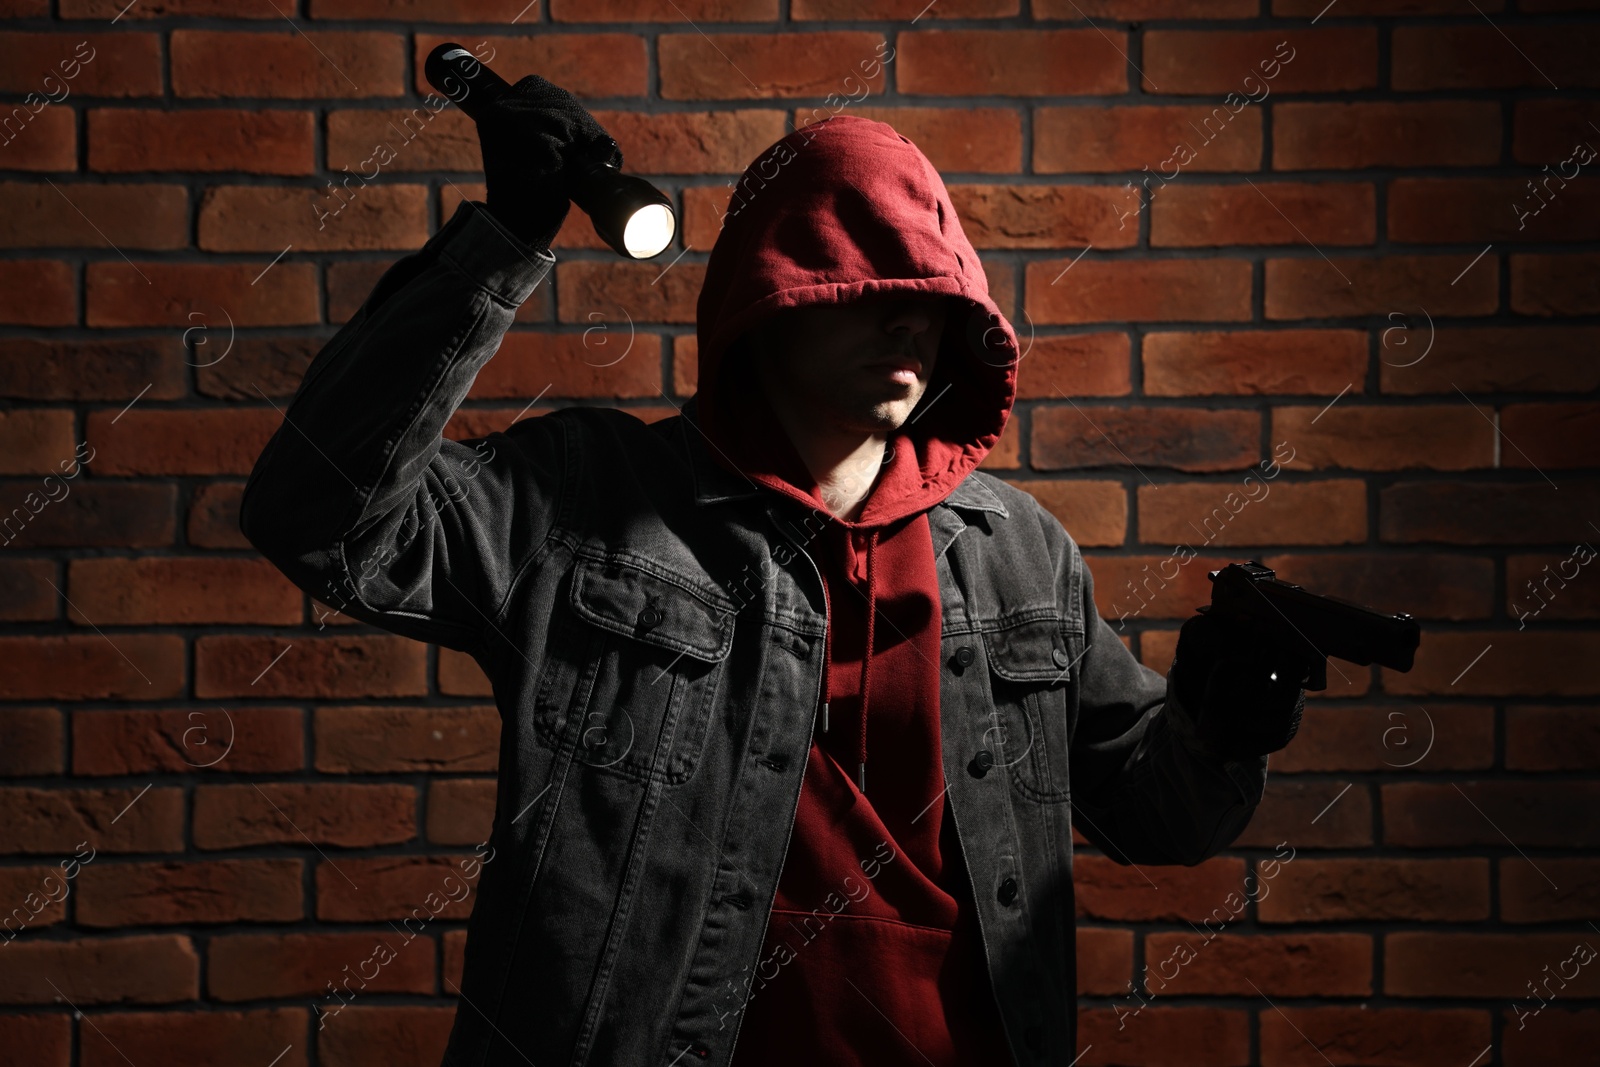 Photo of Thief in hoodie with gun and flashlight against red brick wall